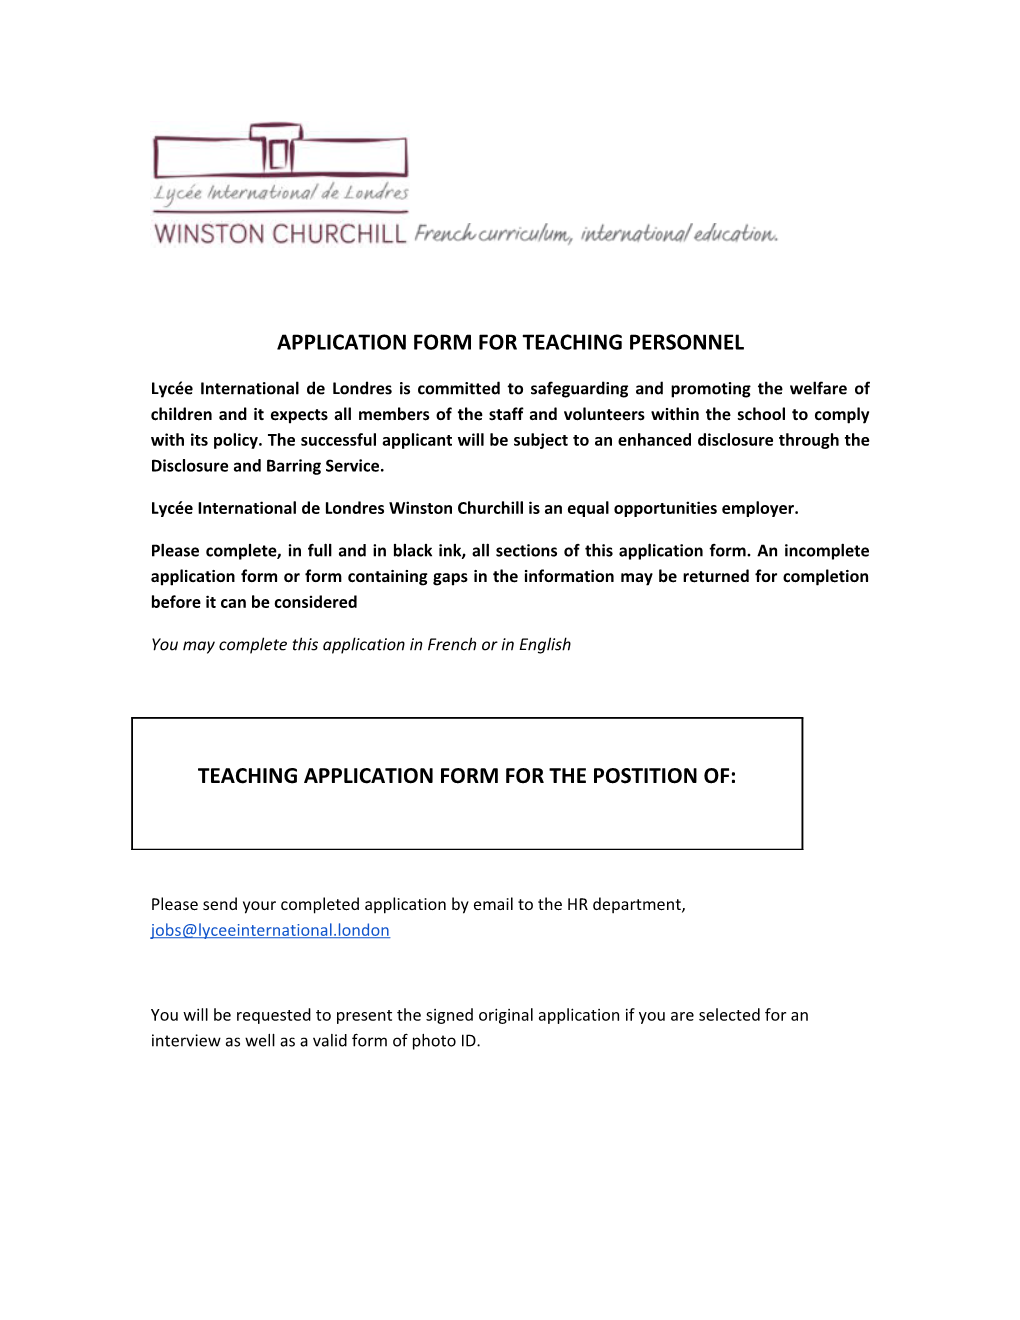 Application Form for Teaching Personnel